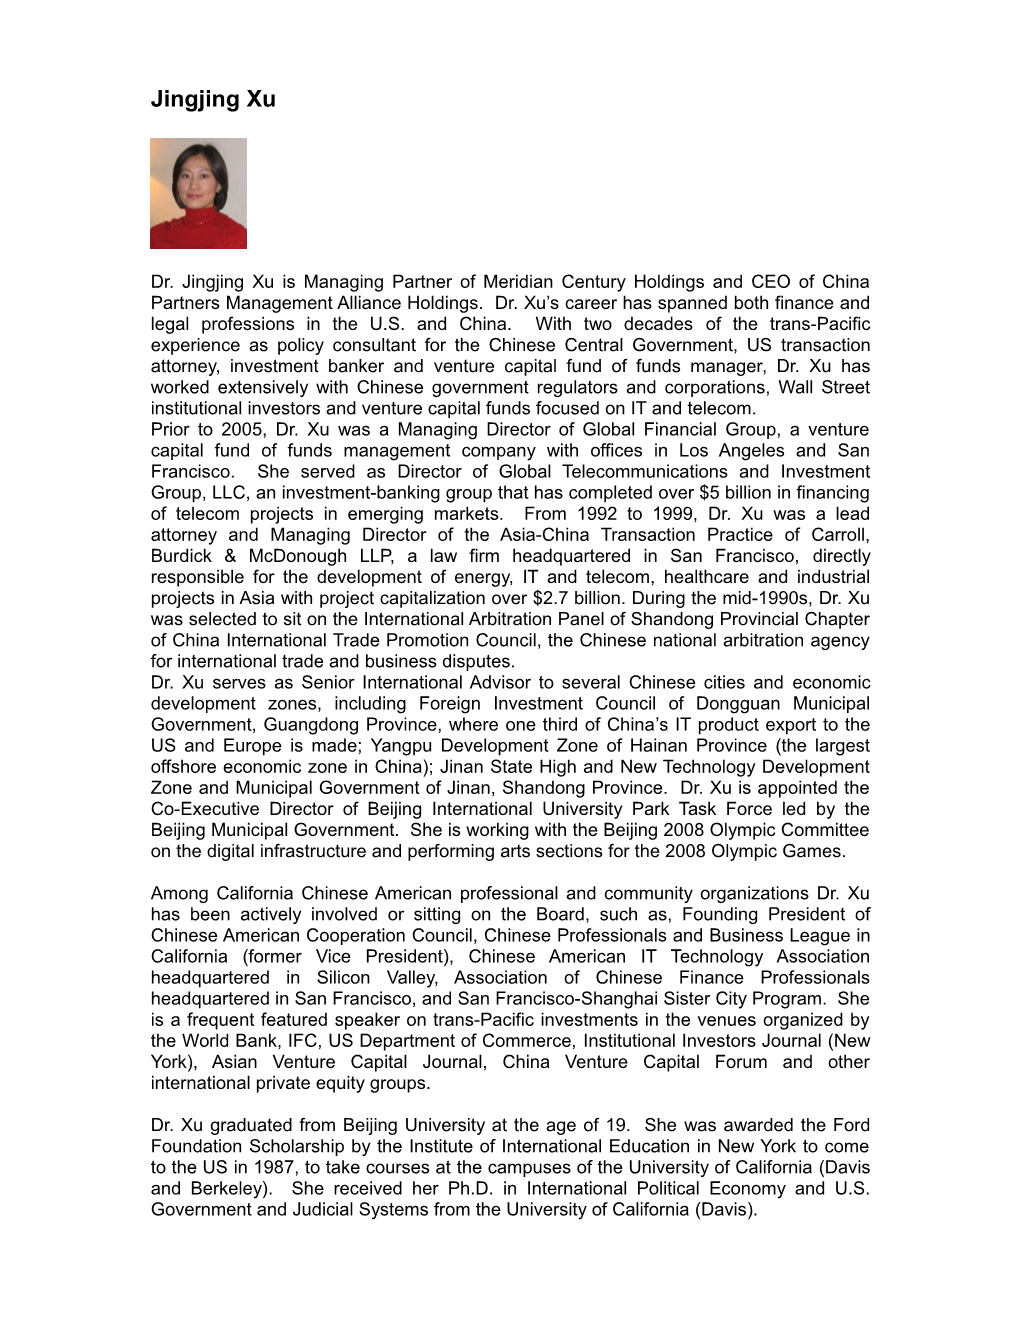 Dr. Jingjing Xu Is Managing Partner of Meridian Century Holdings and CEO of China Partners